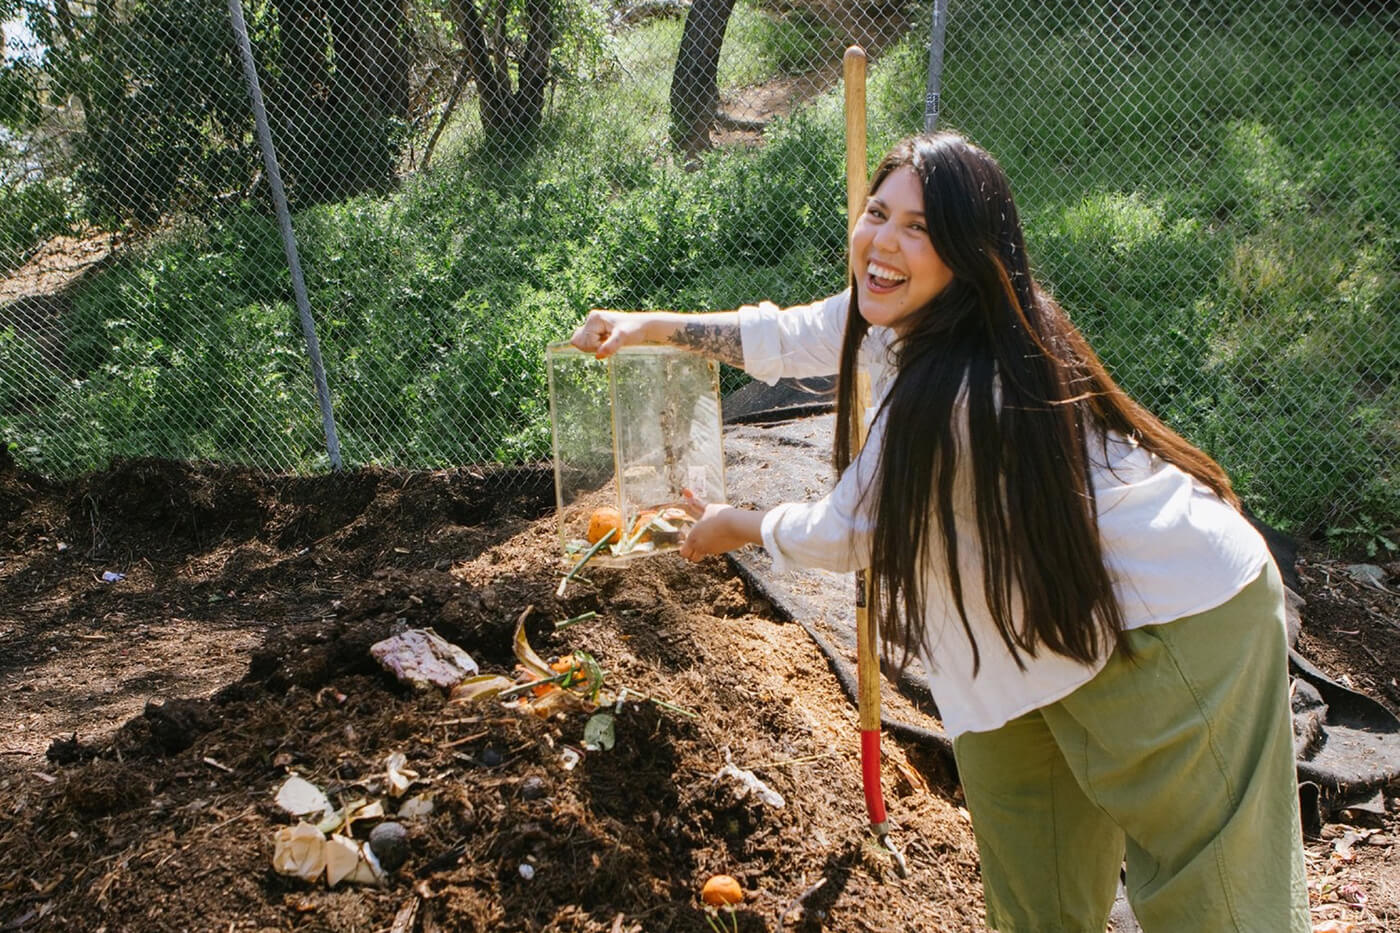 Cindy dumping compost into a pile in her backyard. 